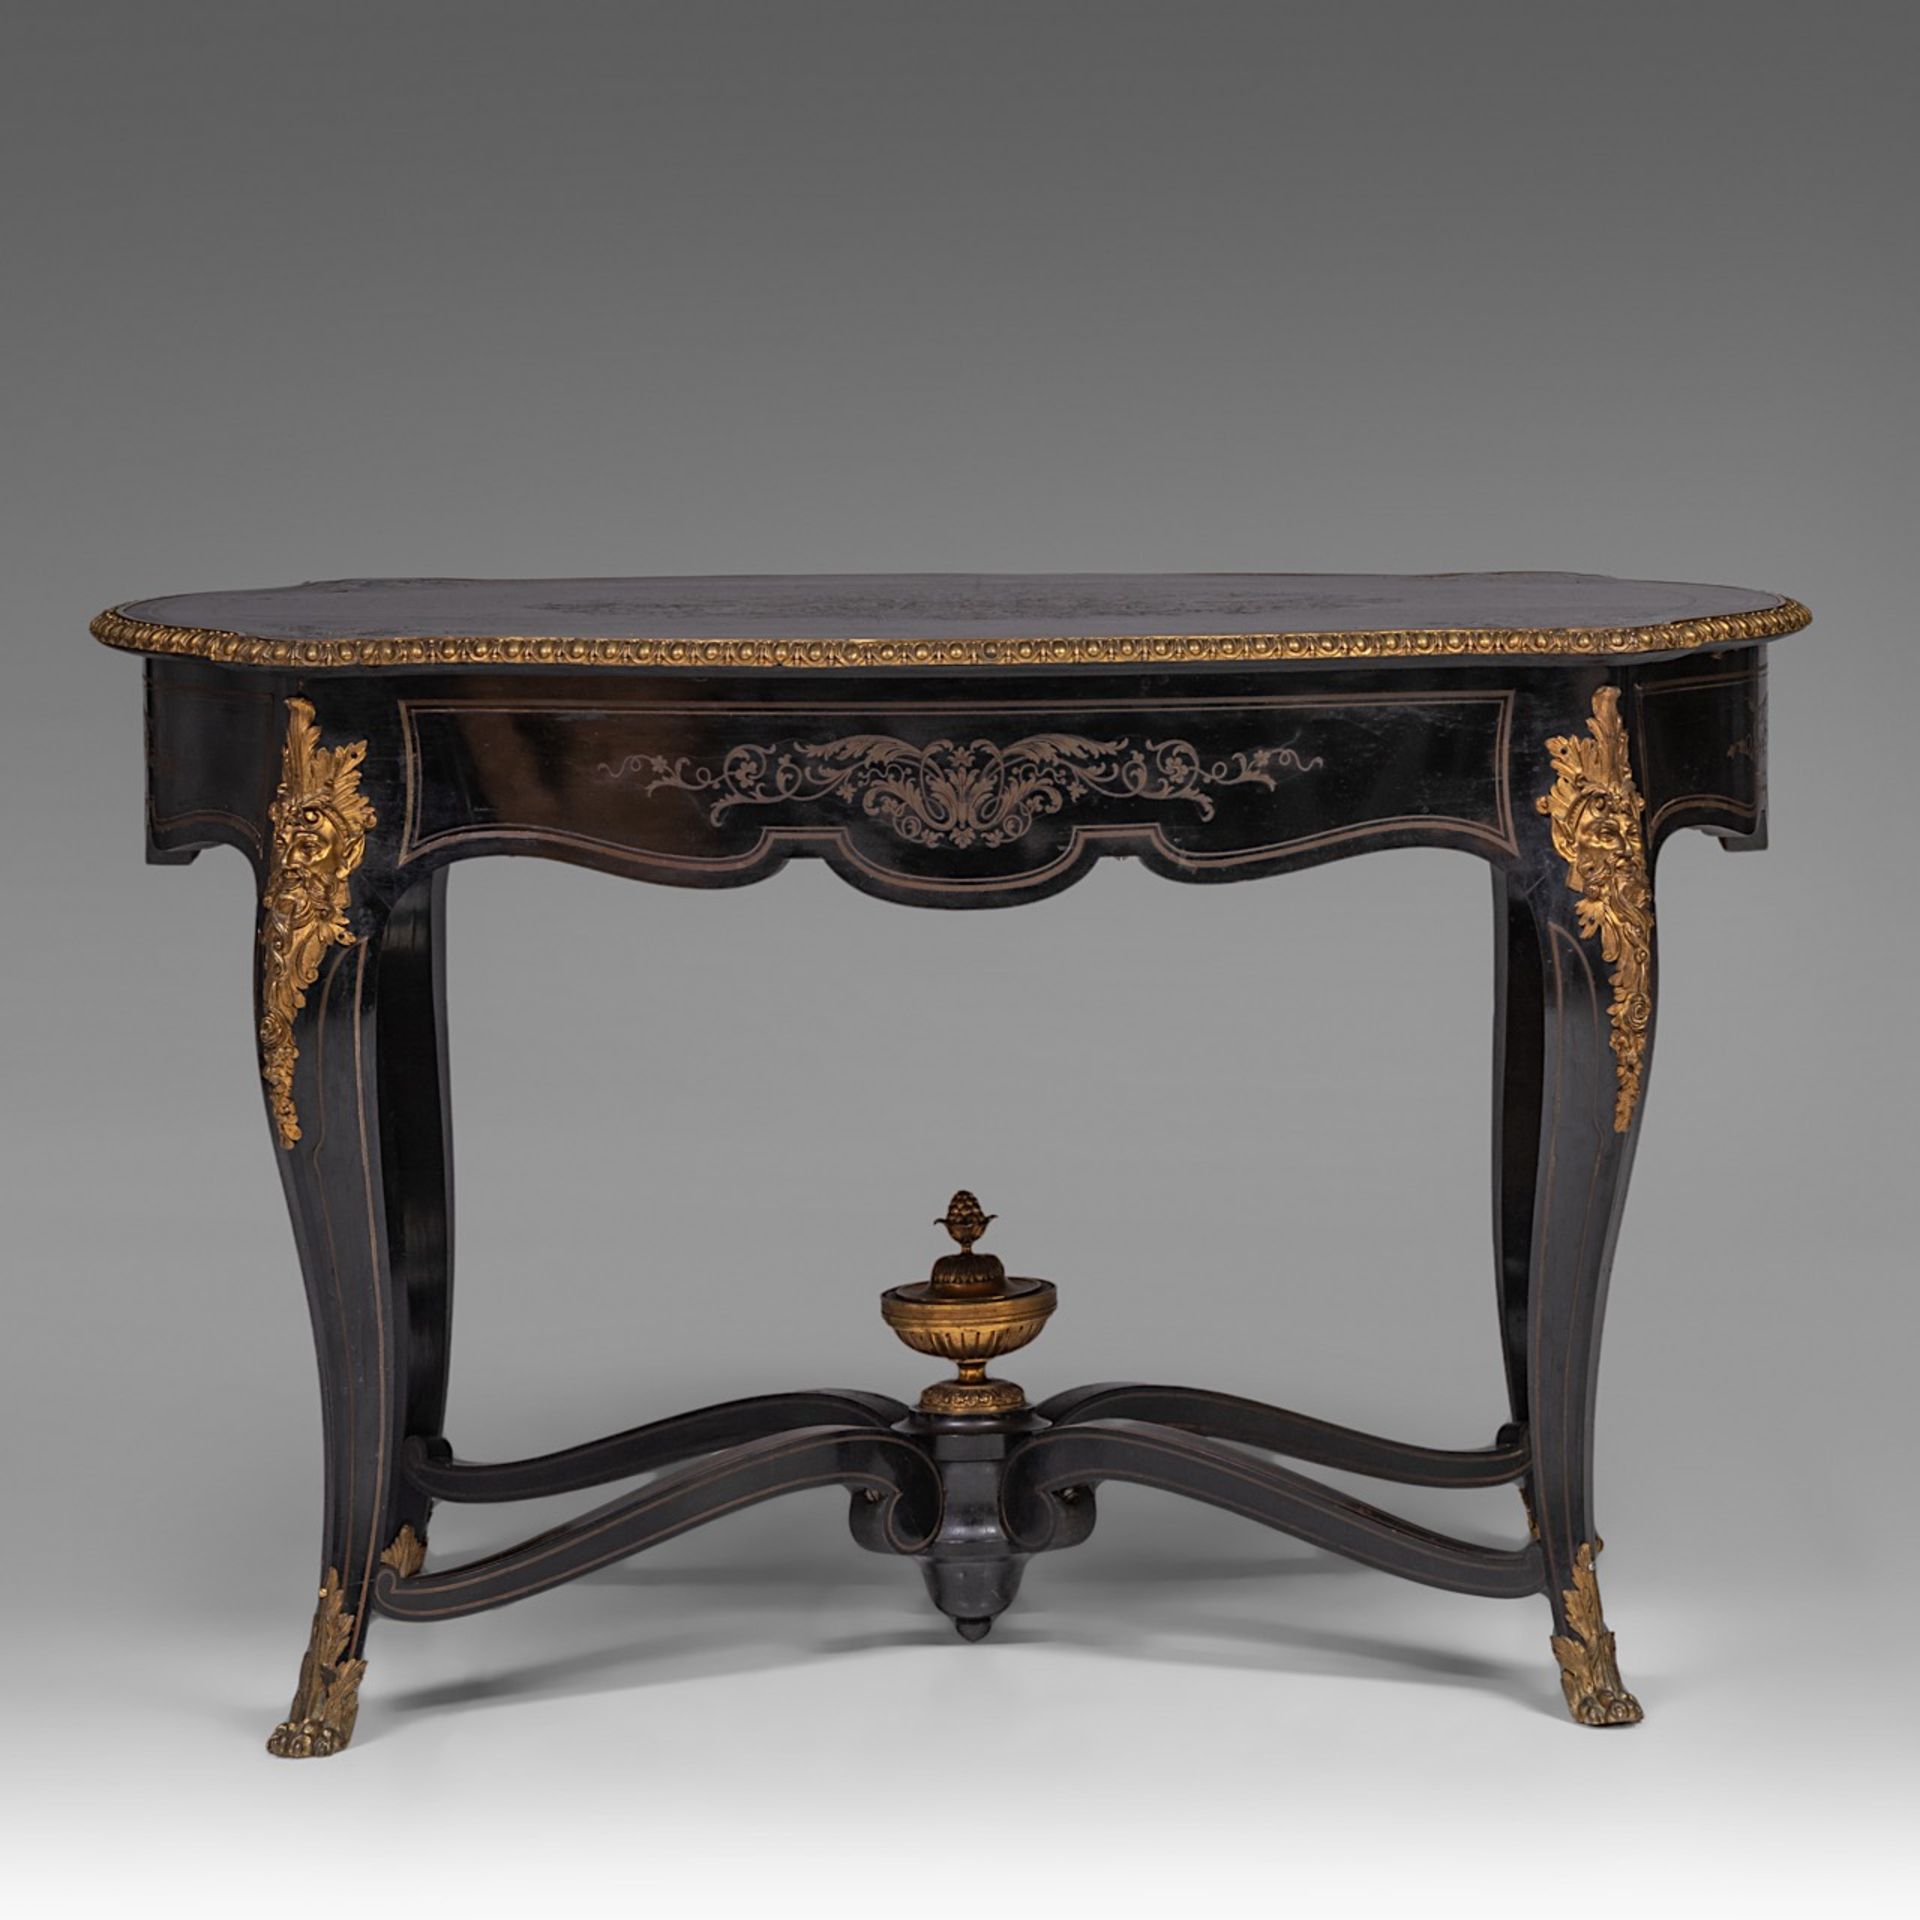 A Napoleon III (1852-1870) Boulle centre table, stamped 'HPR' Henri Picard (1840-1890), H 75 - W 120 - Bild 4 aus 10